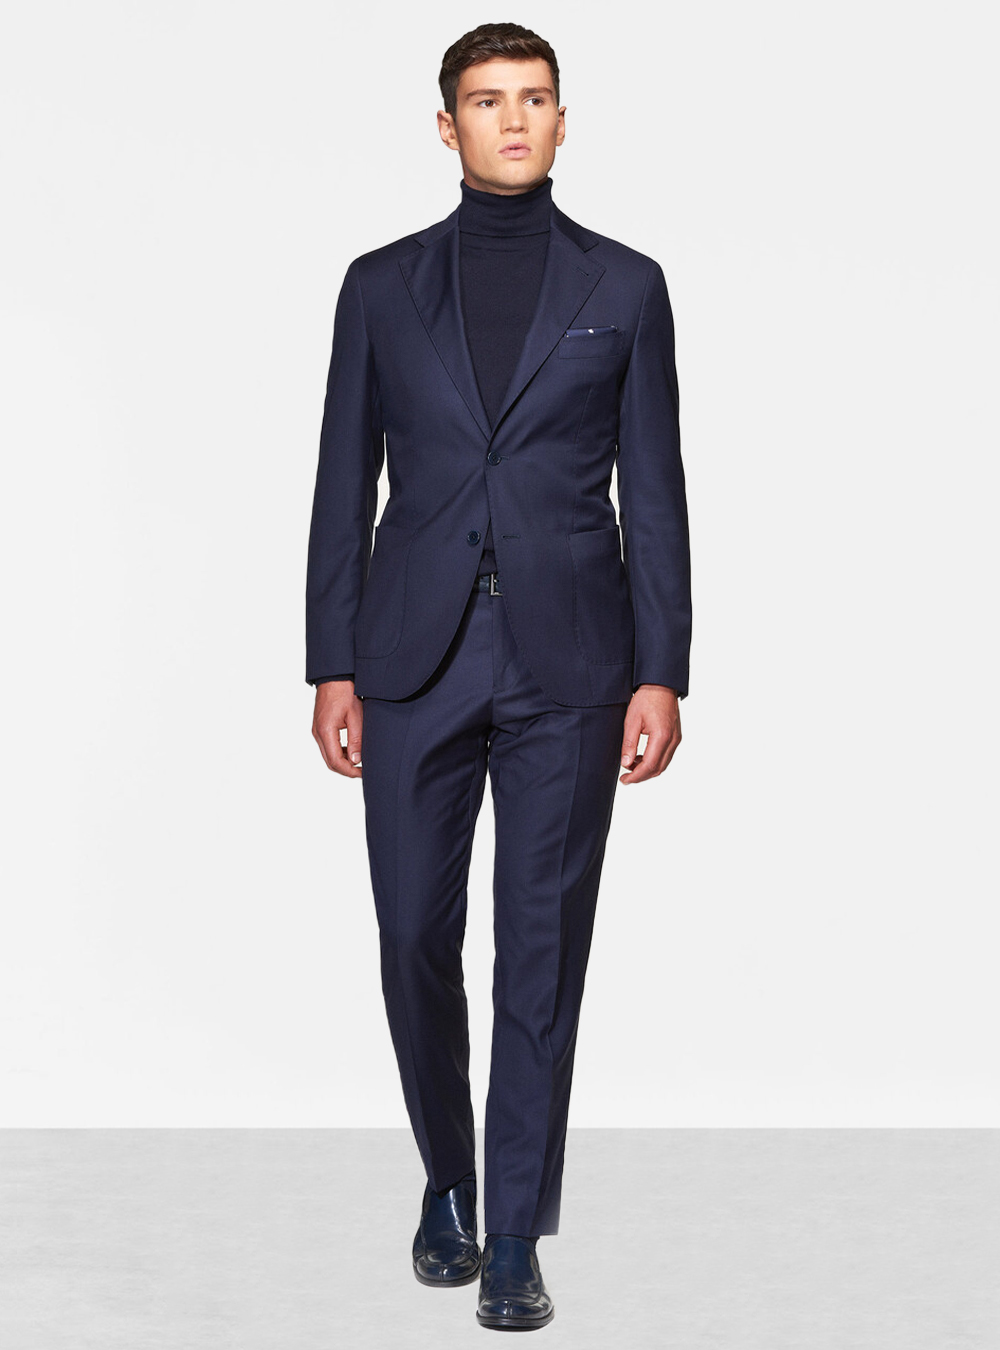 navy suit with a turtleneck